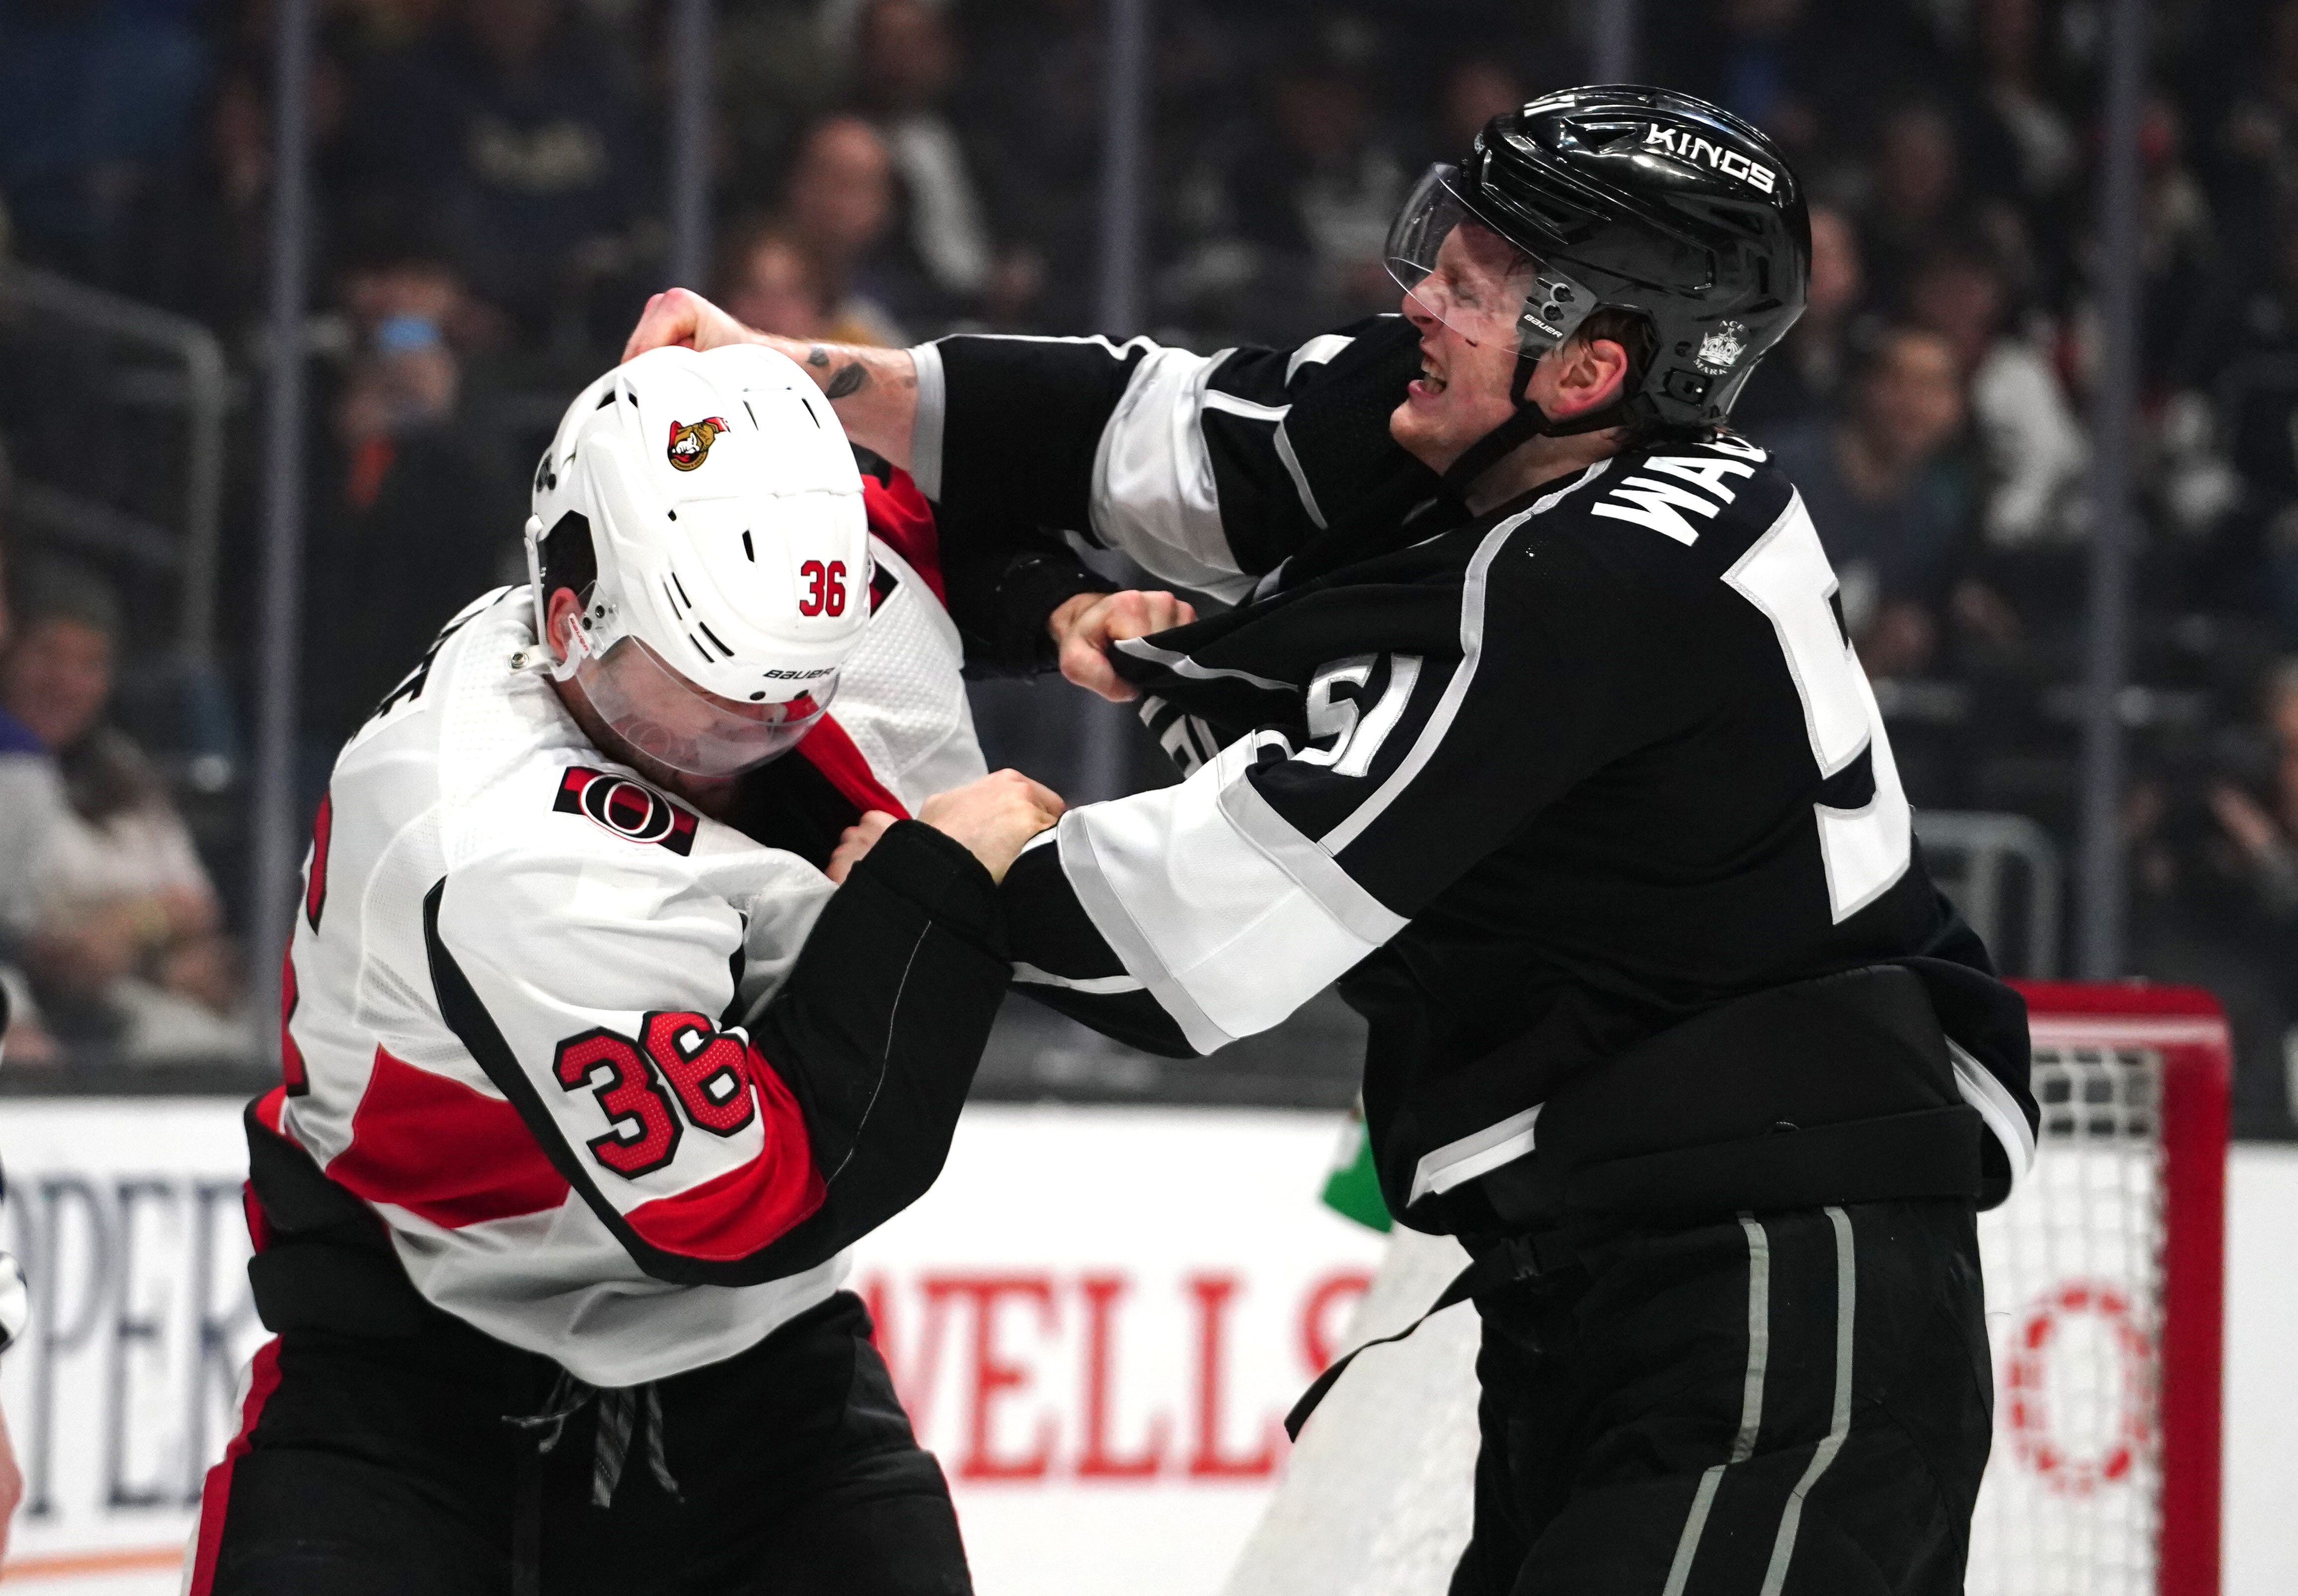 NHL: Fights from the 2019-20 season in 